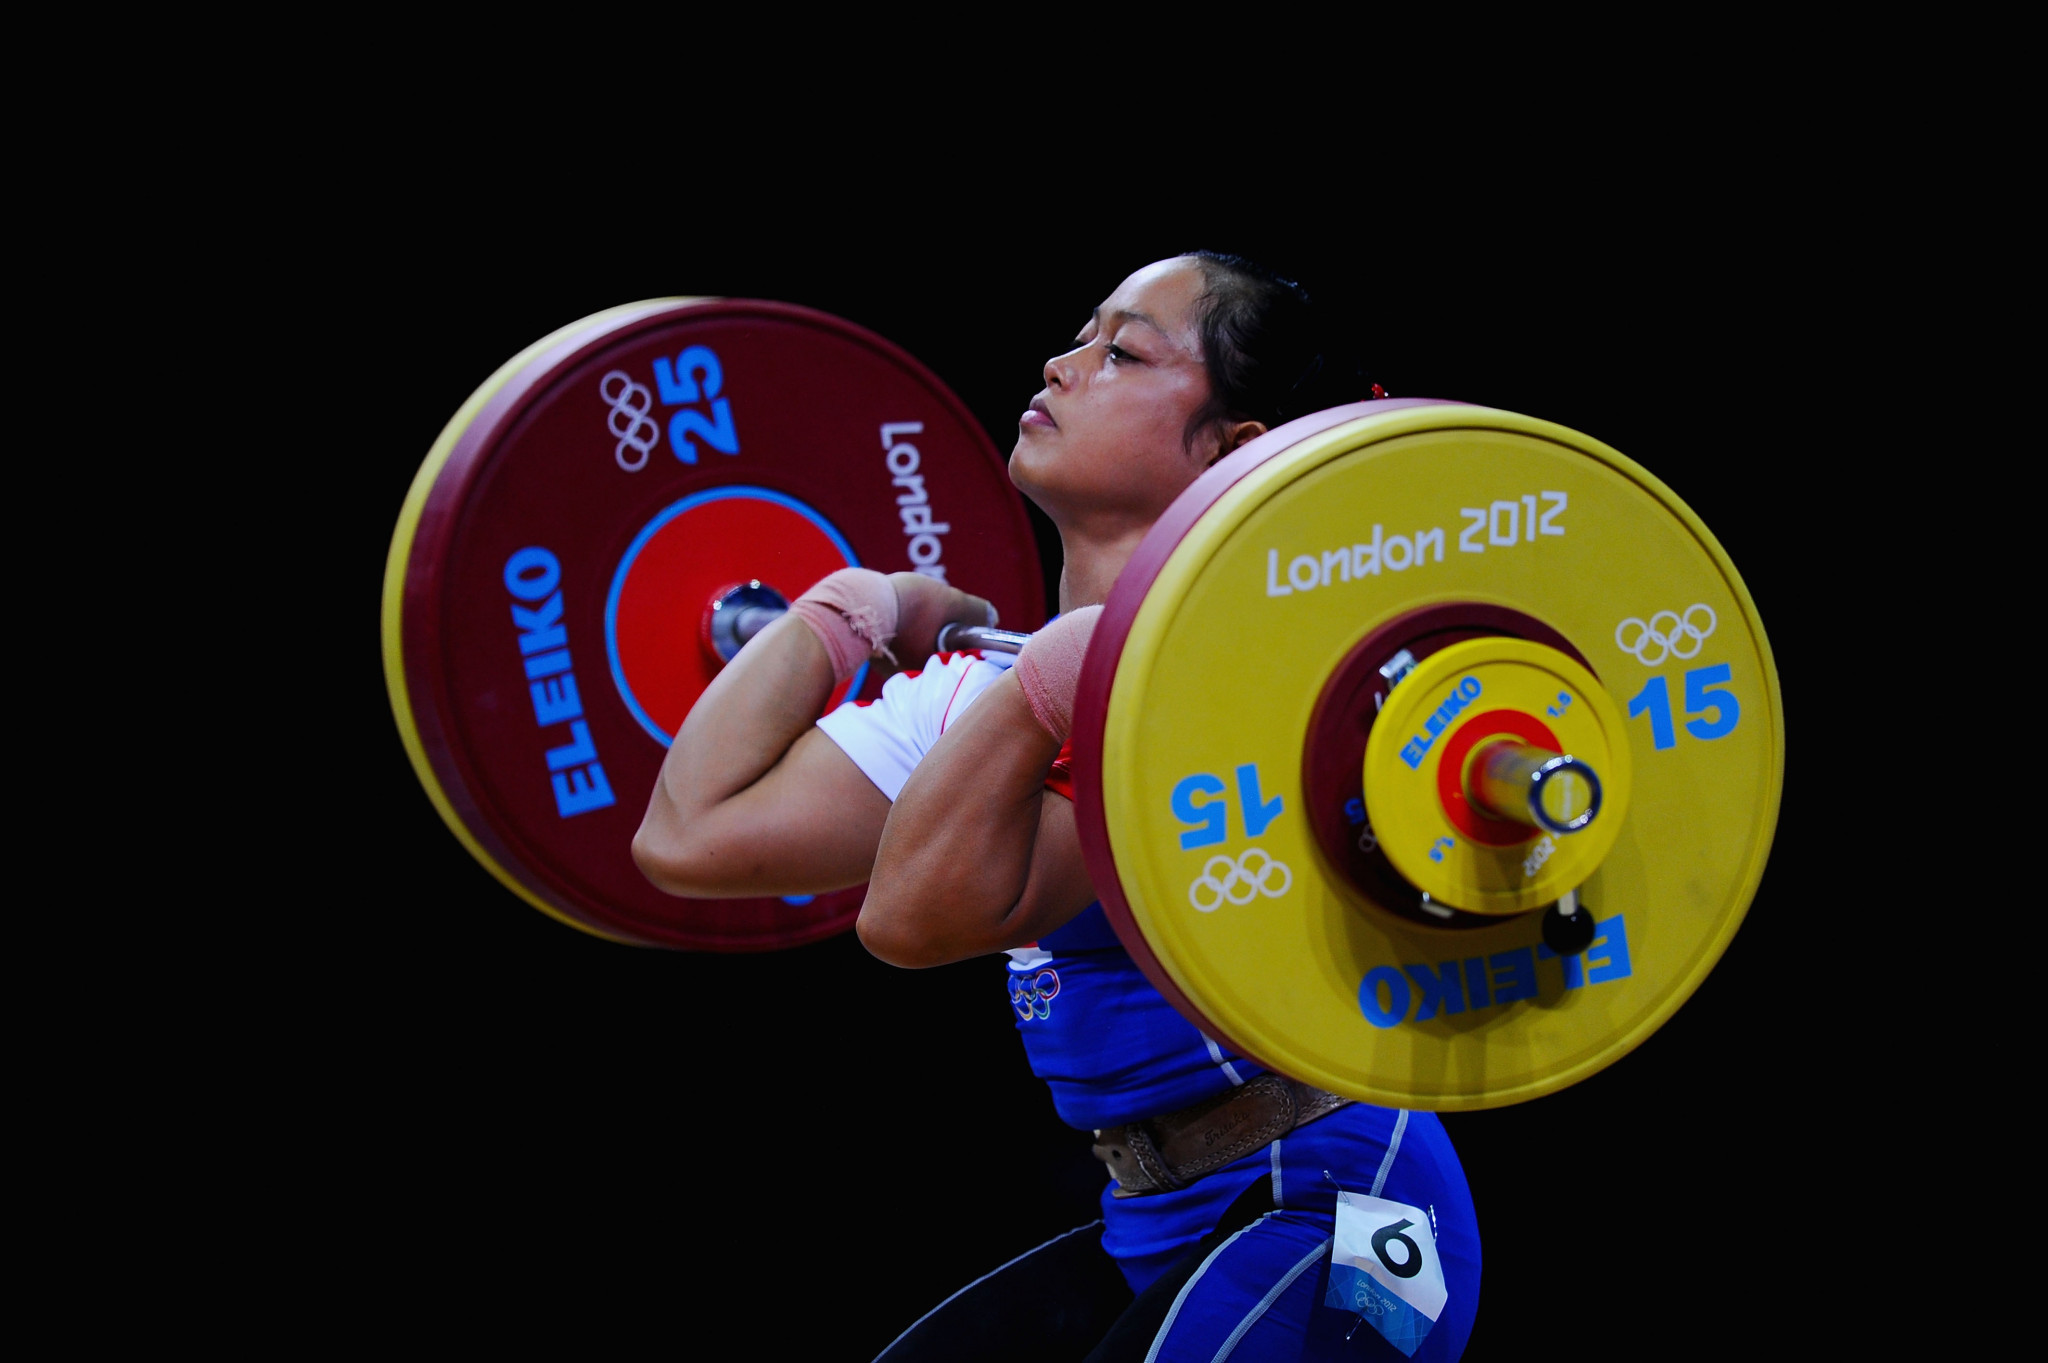 Indonesia's Febrianti receives weightlifting silver medal from London 2012